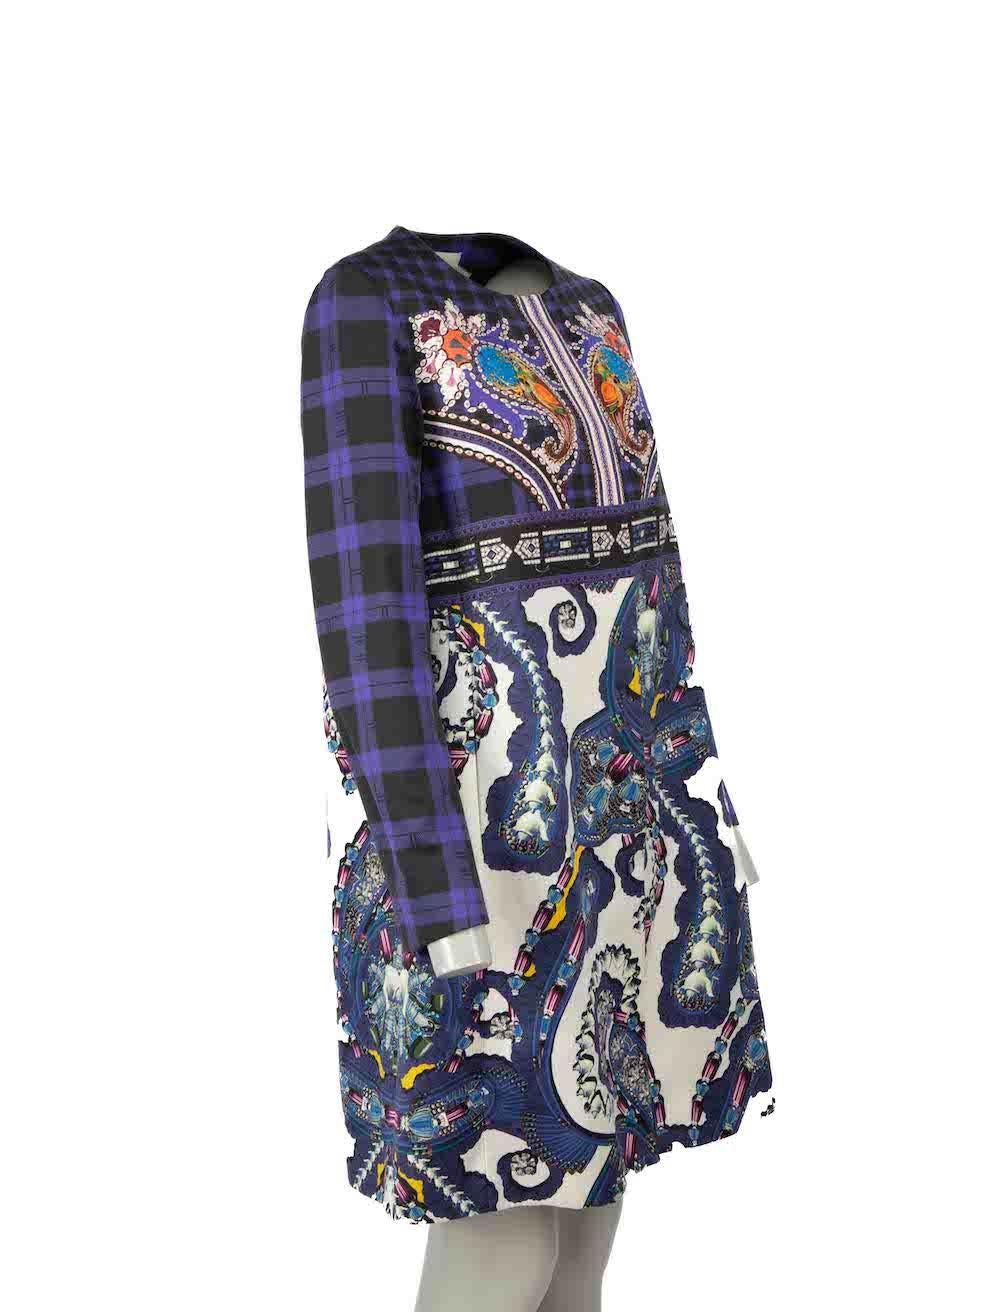 CONDITION is Very good. Hardly any visible wear to coat is evident on this used Mary Katrantzou designer resale item.

Details
Purple
Cotton
Coat
Jewell and checkered print
Snap button fastening
Round neck
2x Side pockets

Made in UK